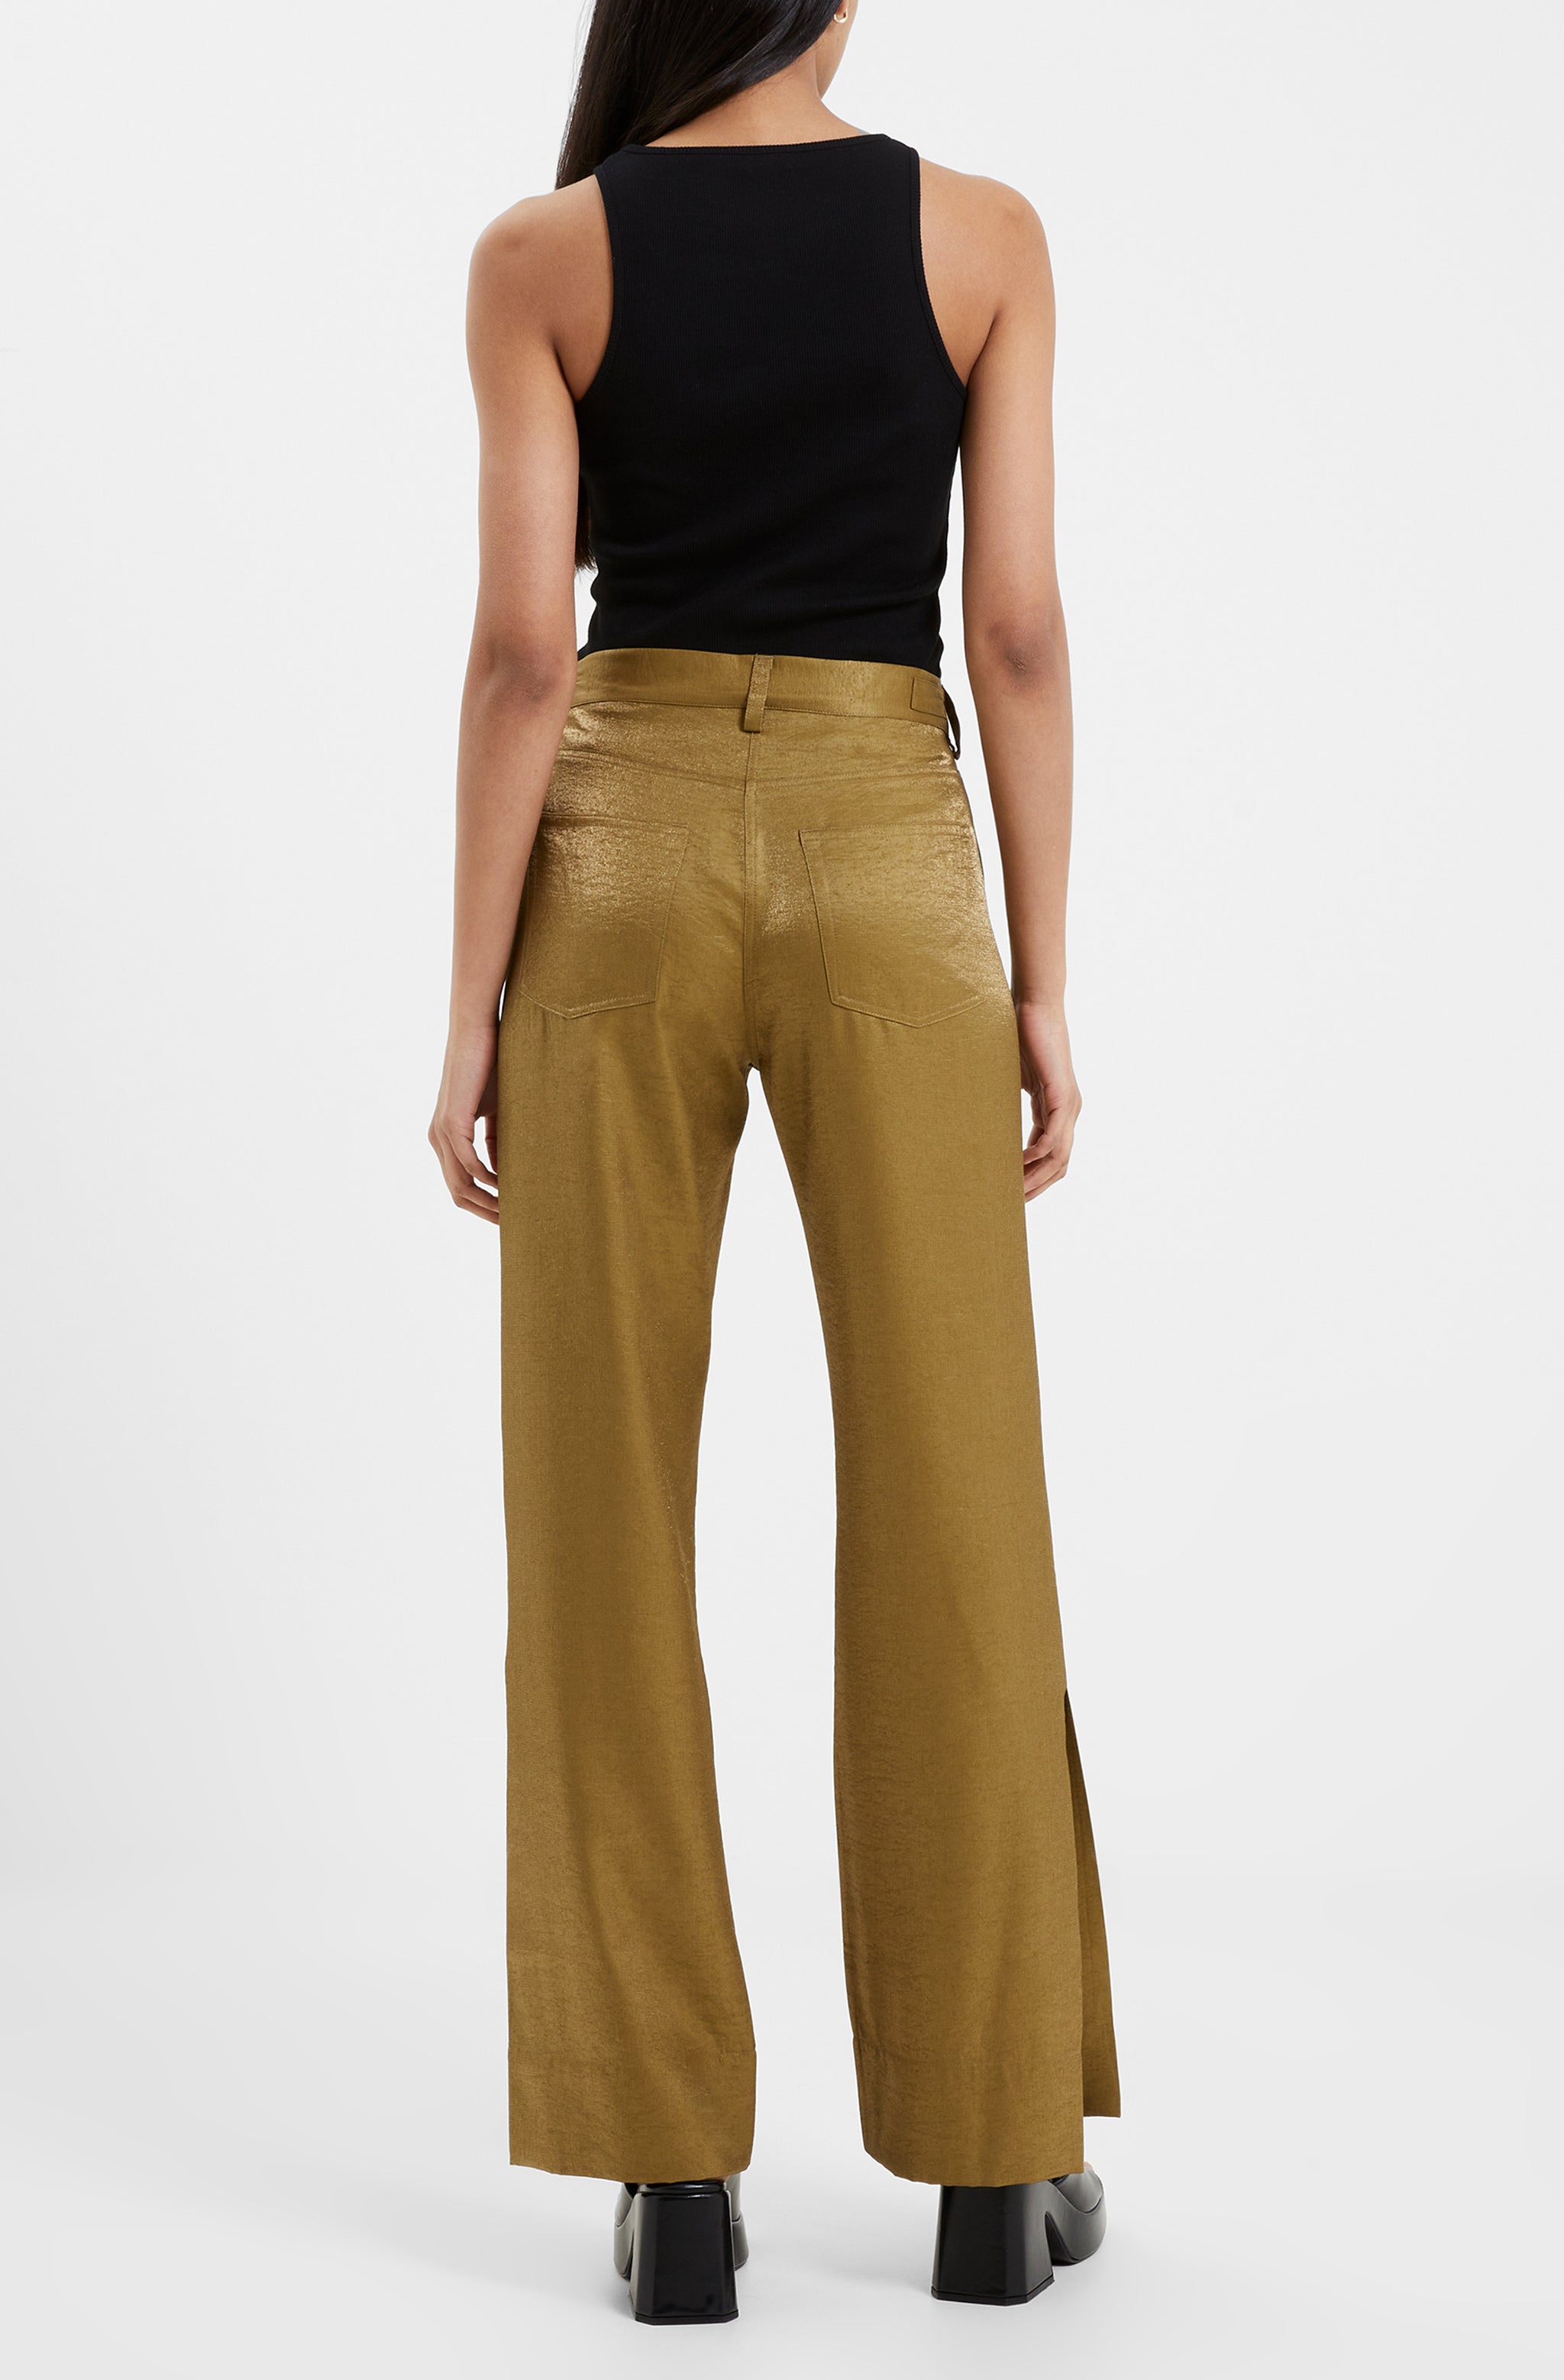 Cammie Shimmer Trousers